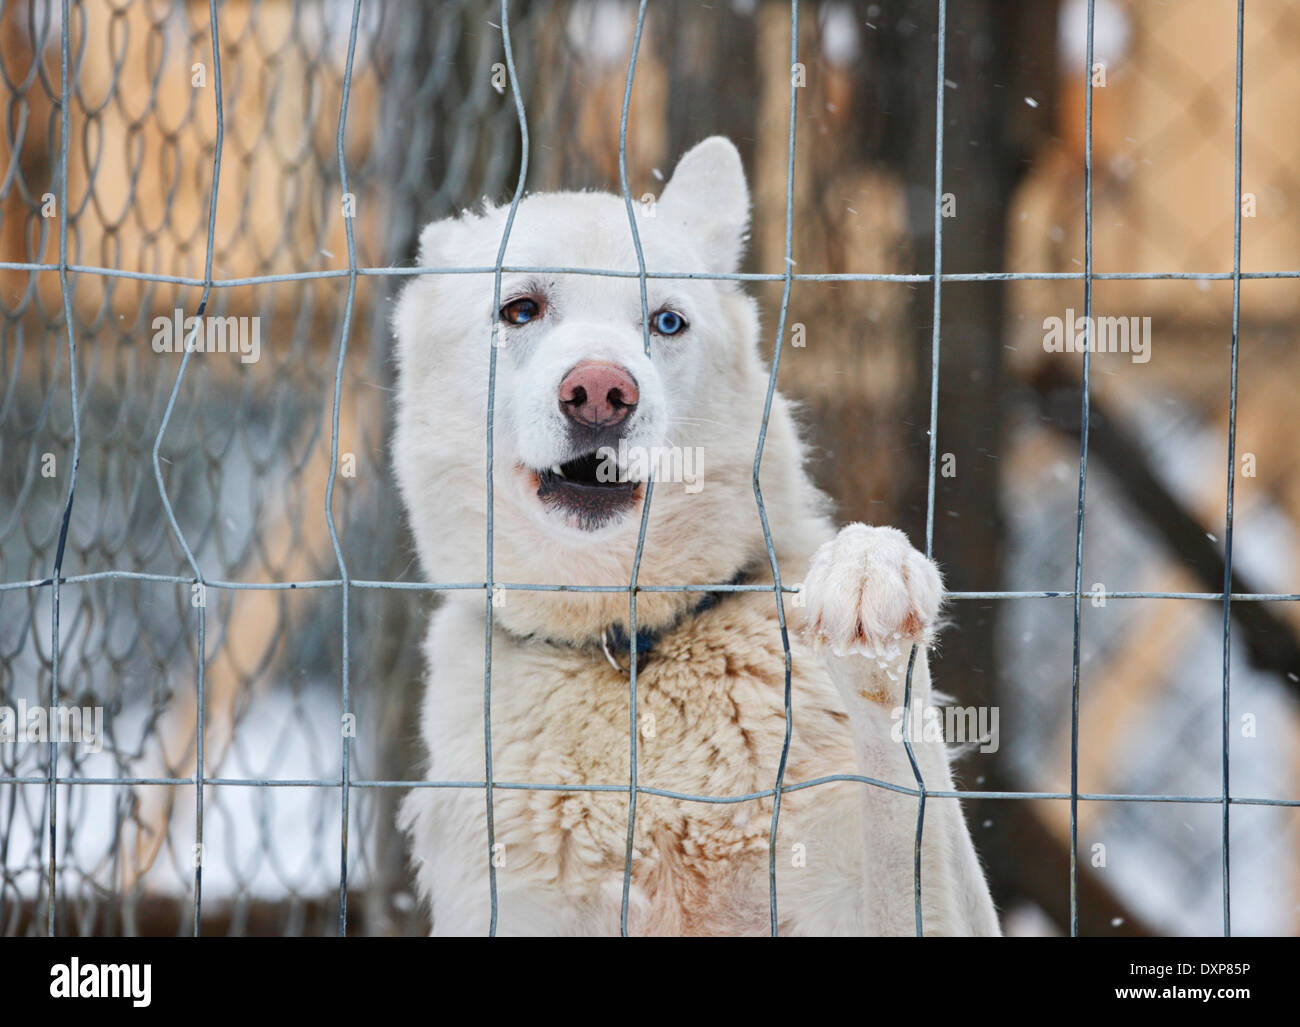 Sad Animals High Resolution Stock Photography and Images - Alamy